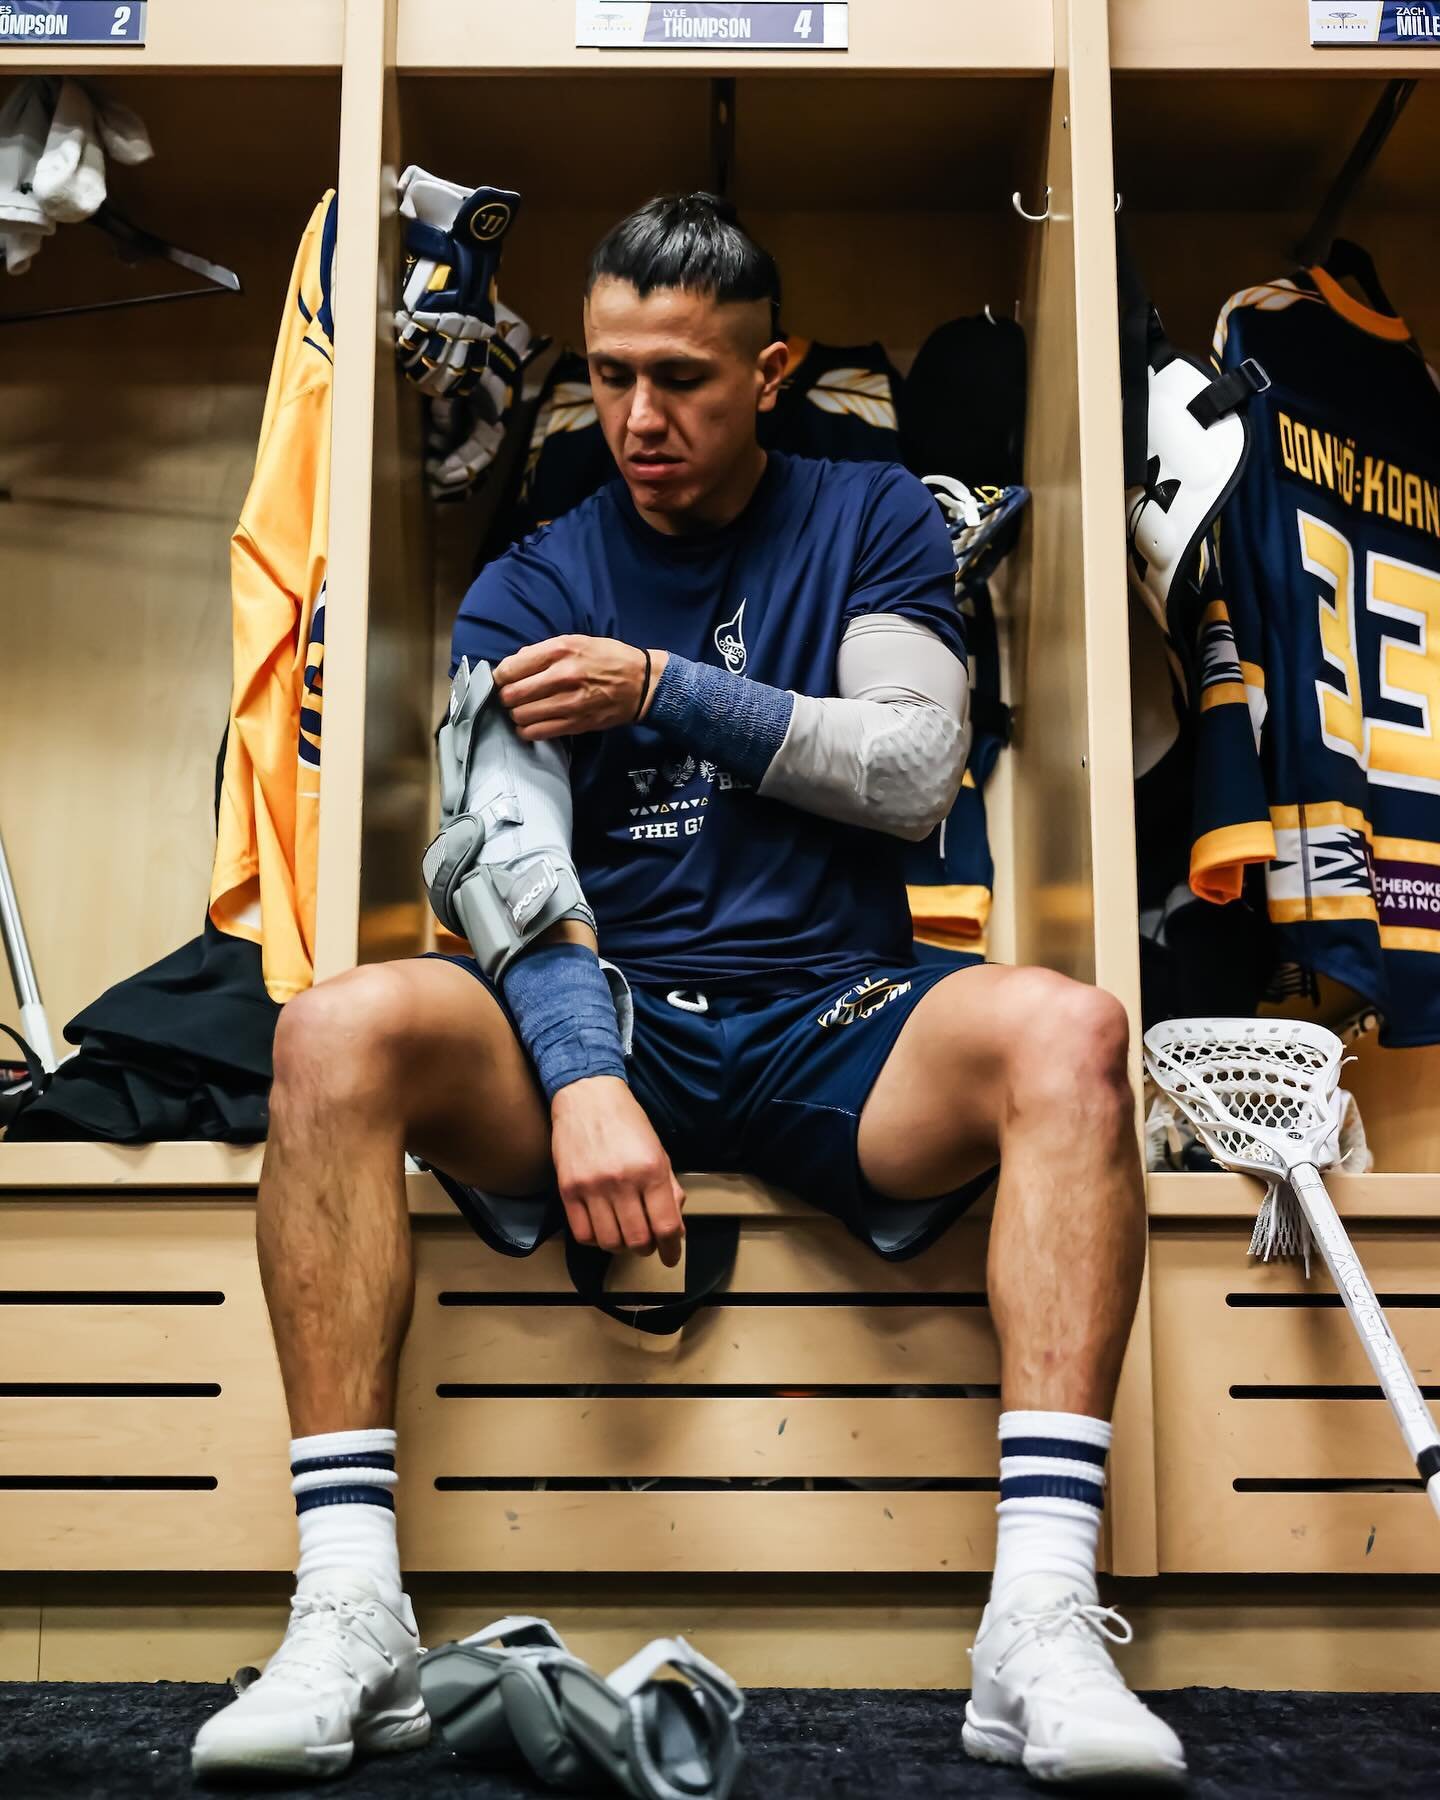 sports&middot;man&middot;ship
&nbsp;
fair and generous behavior or treatment of others, especially in a sports contest
&nbsp;
Congrats on six straight, @lyle4thompson 

📷 @ashergreenephoto